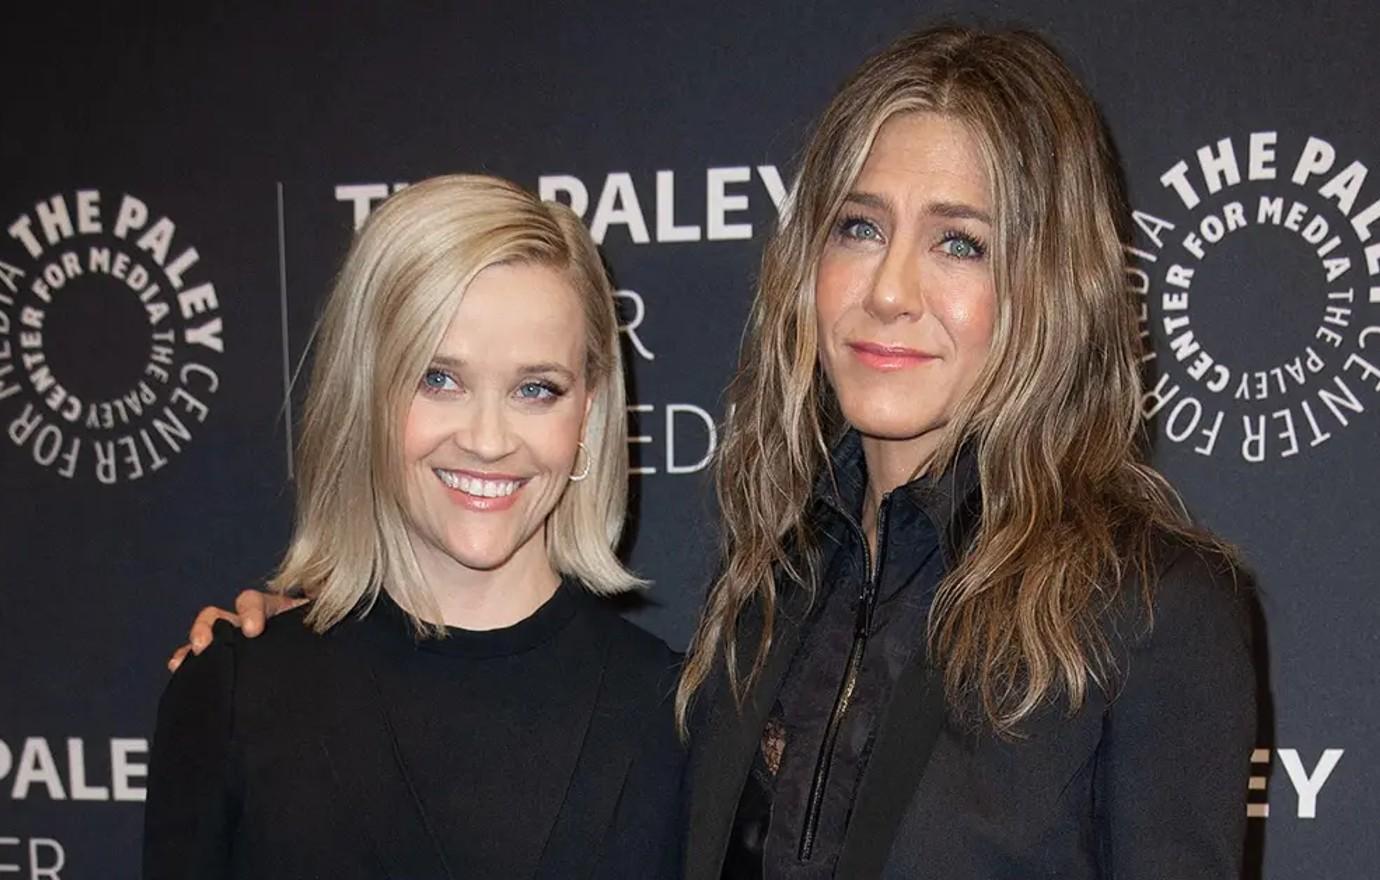 Jennifer Aniston jets back with her A-list pals after annual New